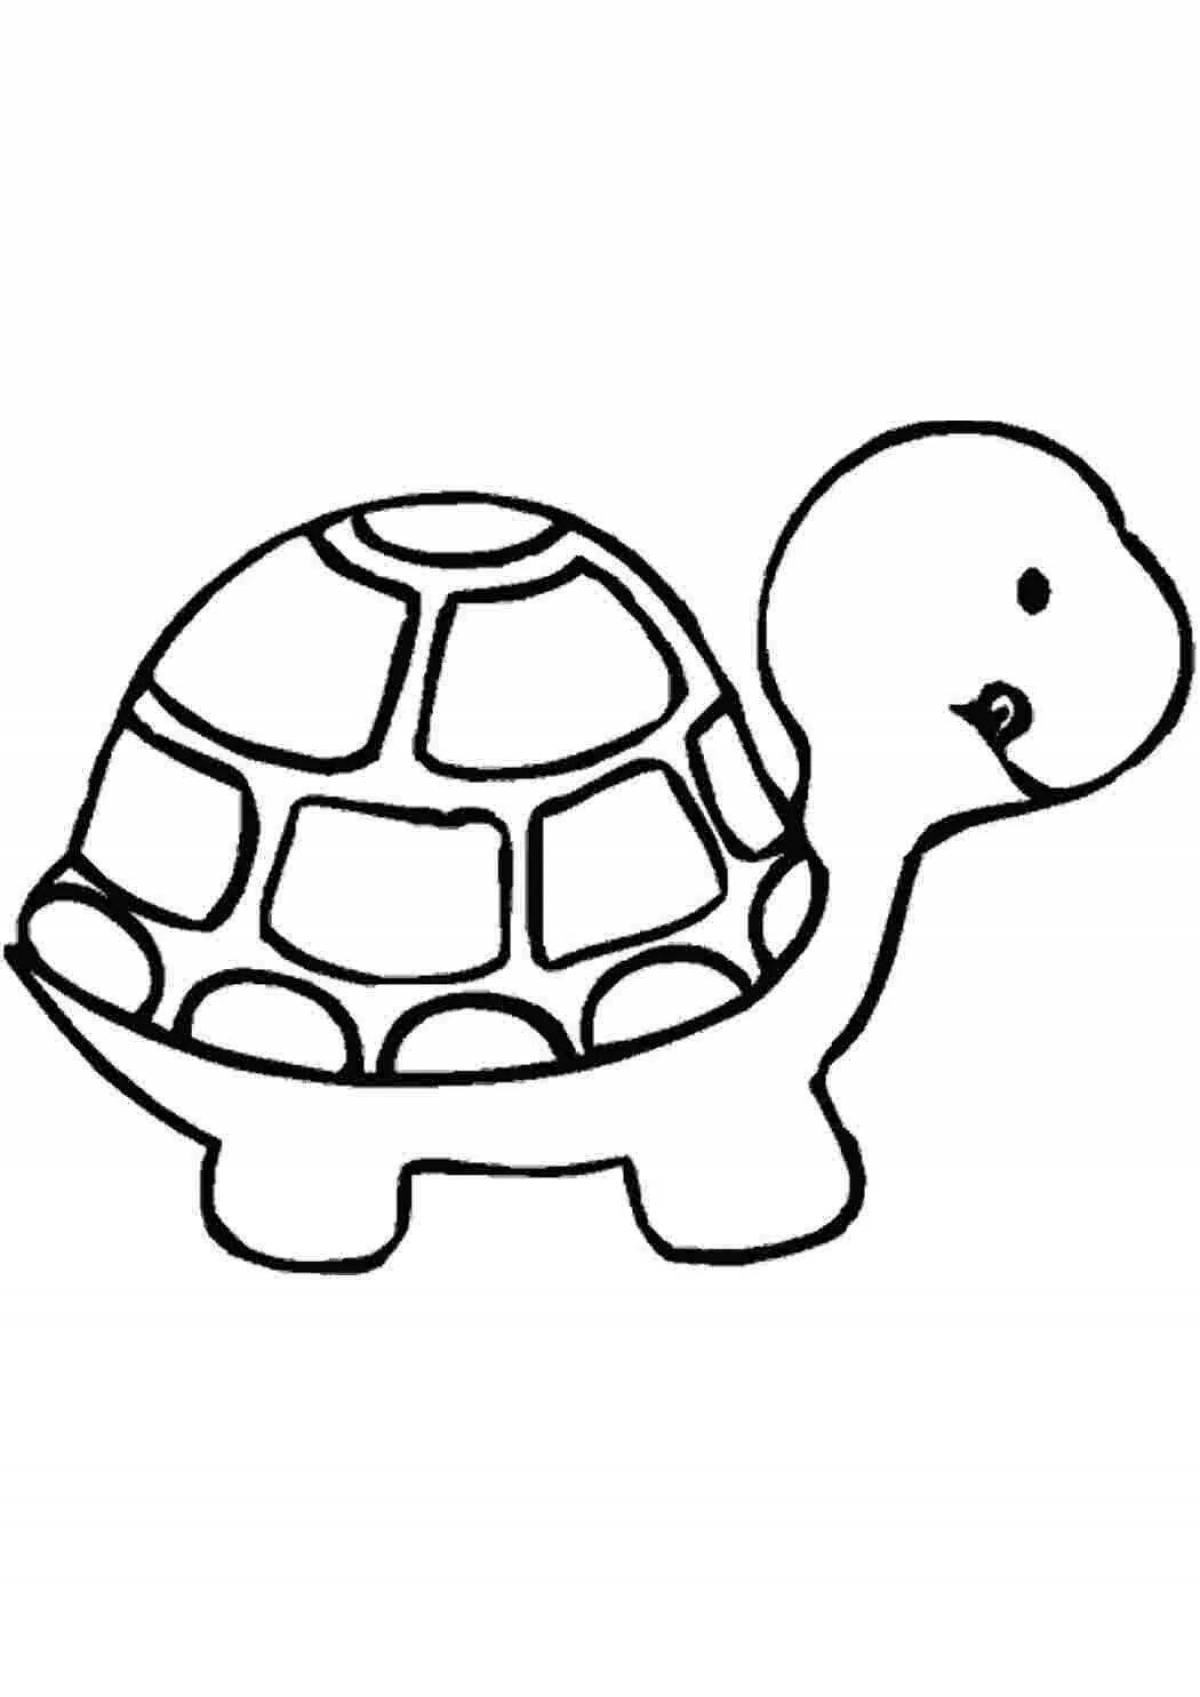 Animated turtle coloring book